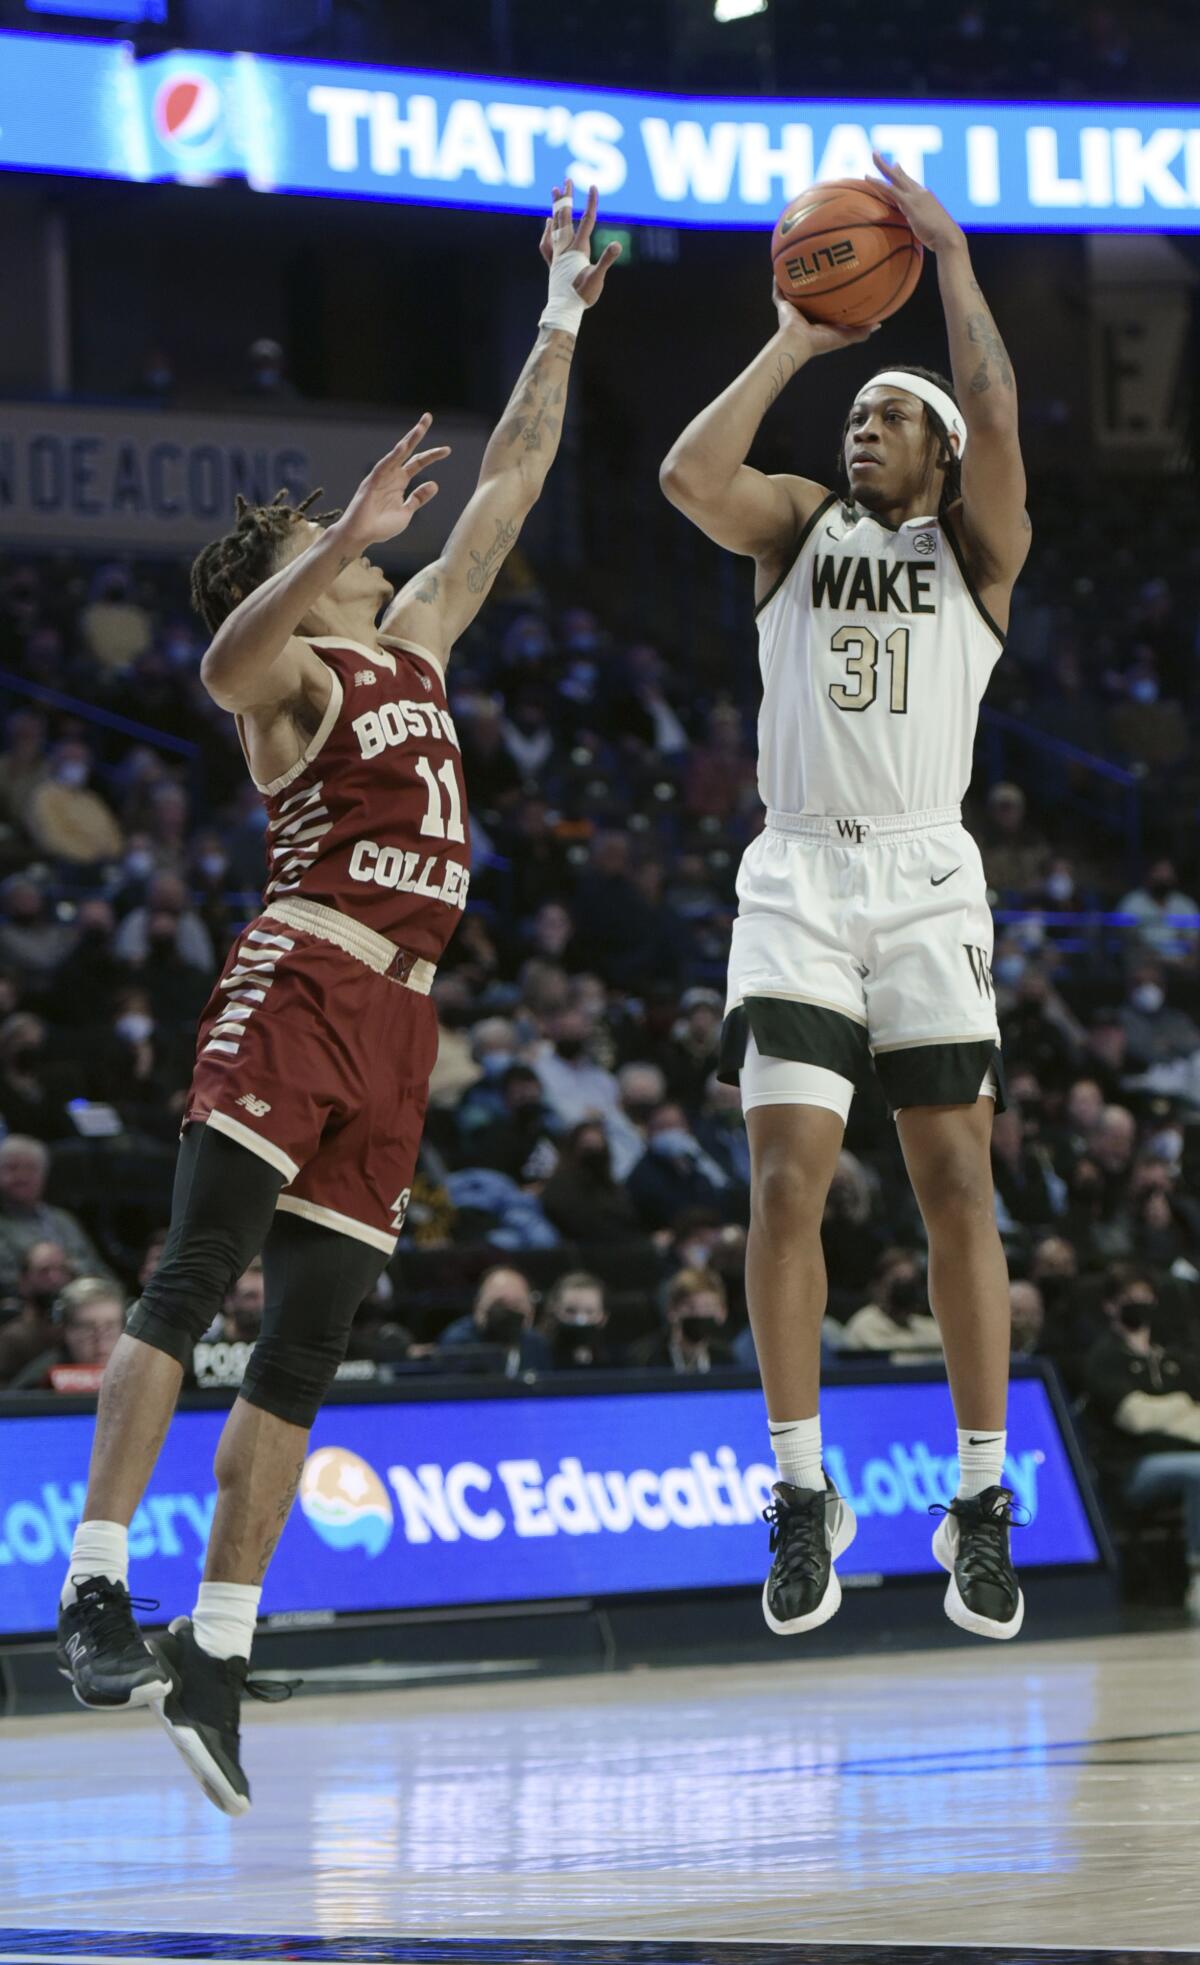 Wake Forest's Alondes Williams shoots from the top of the key under pressure from Boston College's Makai Ashton-Langford in the first half of an NCAA college basketball game, Monday, Jan. 24, 2022, in Winston-Salem, N.C. (Walt Unks/The Winston-Salem Journal via AP)